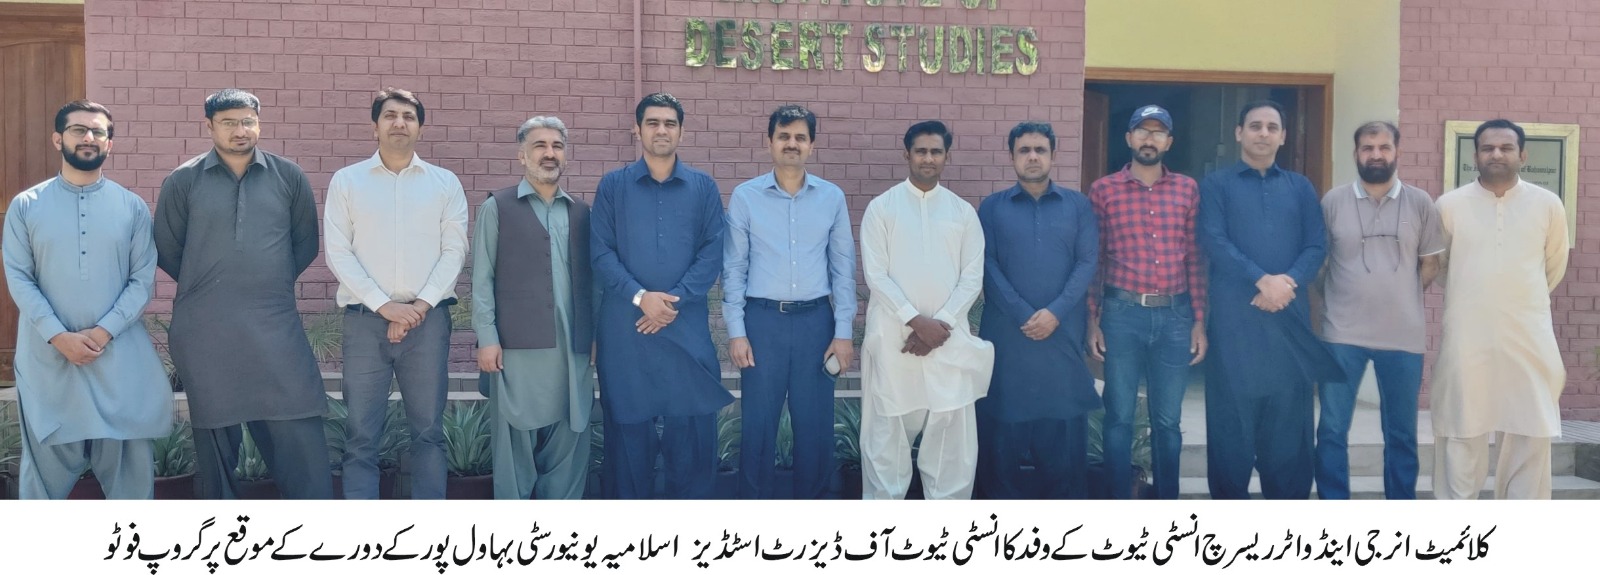 Climate Energy and Water Research Institute of National Agriculture Research Center visit IUB urdu 3